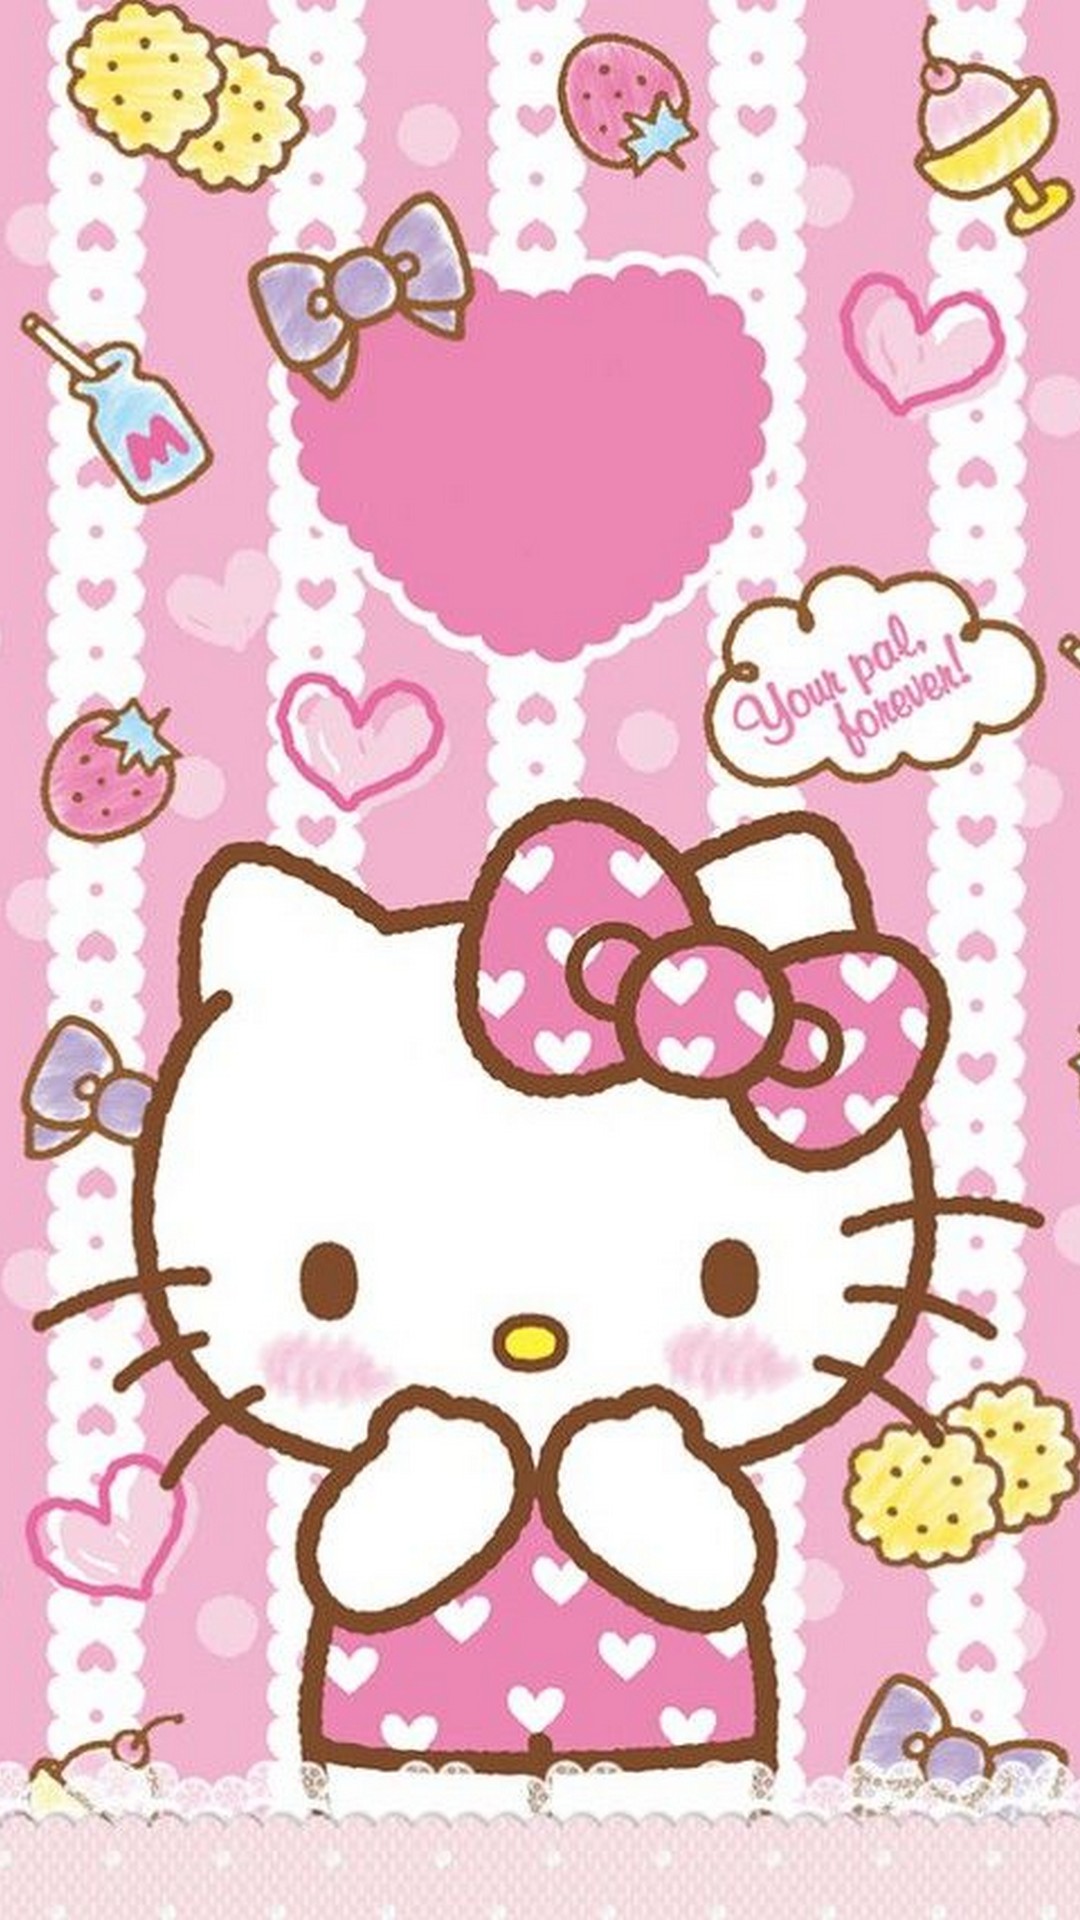 Hello Kitty Characters Wallpaper For Android with image resolution 1080x1920 pixel. You can make this wallpaper for your Android backgrounds, Tablet, Smartphones Screensavers and Mobile Phone Lock Screen